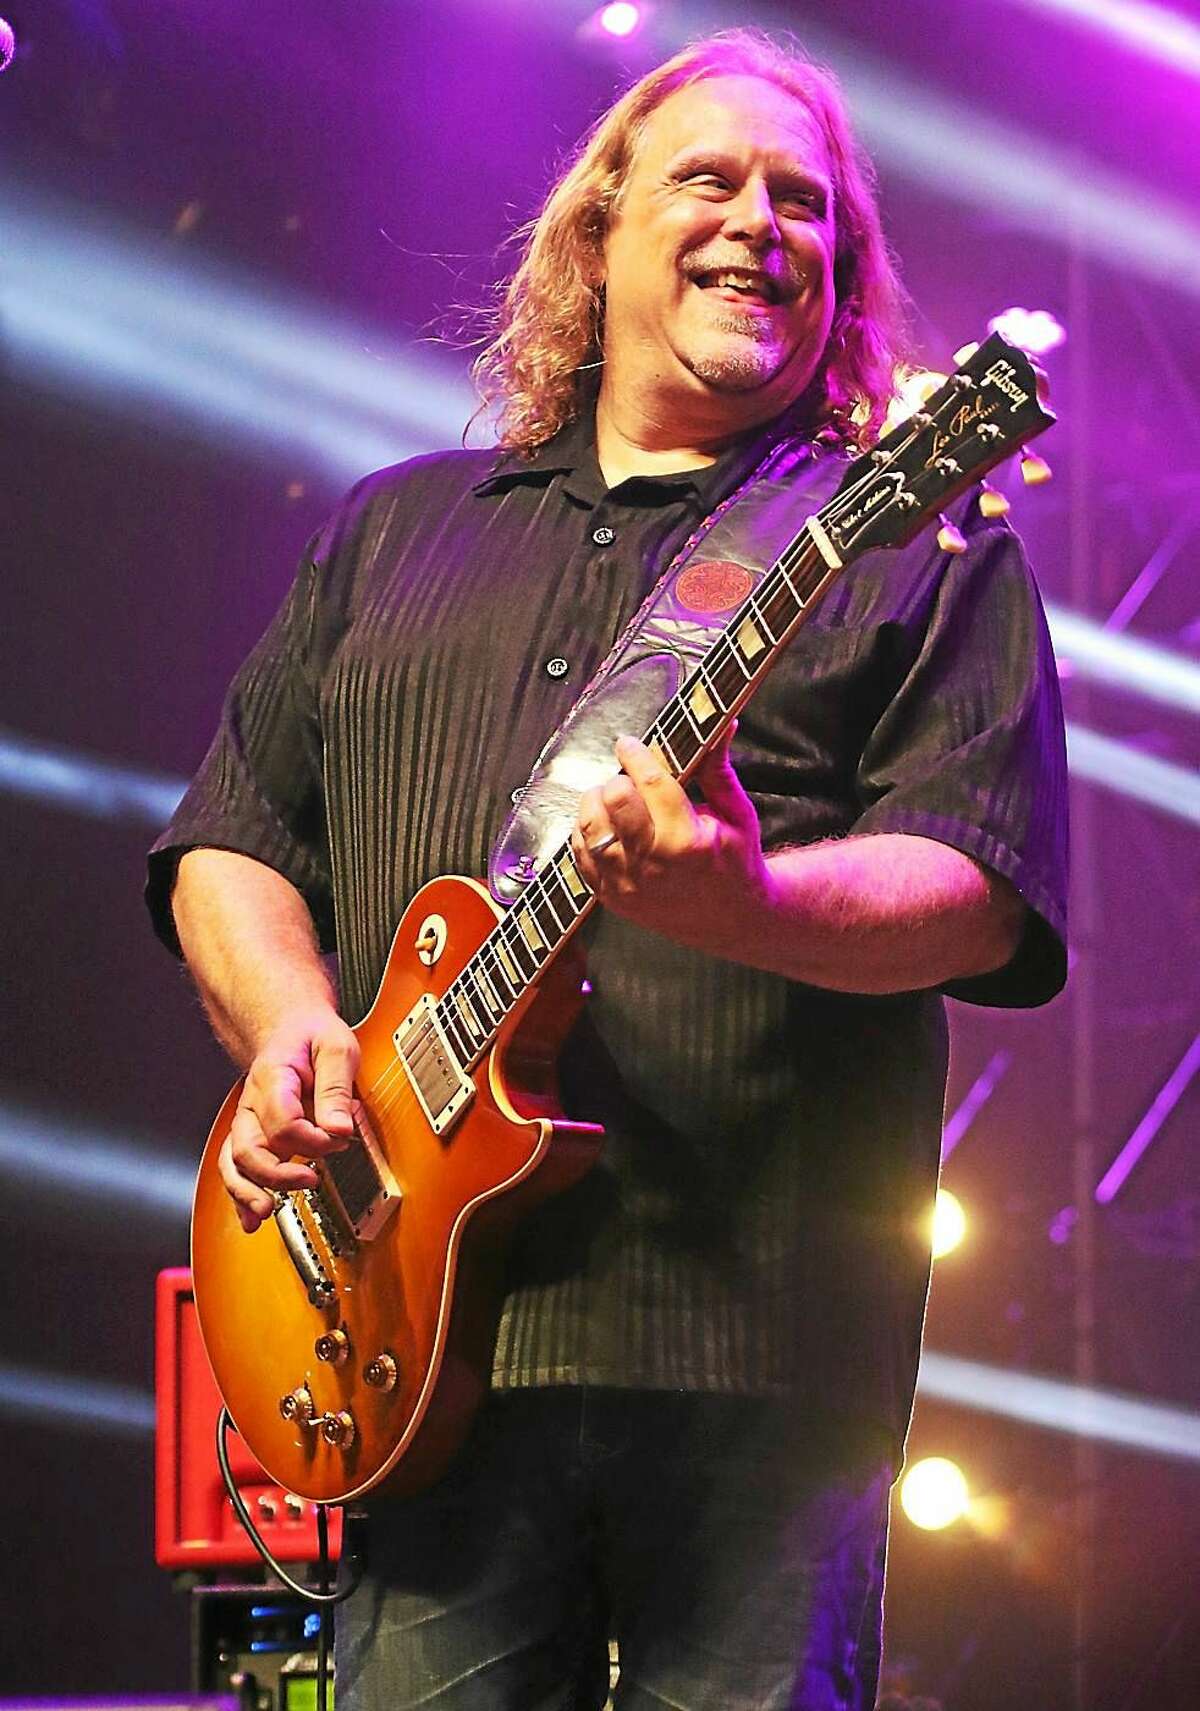 Photo by John Atashian Warren Haynes and the All Stars, including Warren Haynes, performed at the Gathering of the Vibes in Bridgeport.